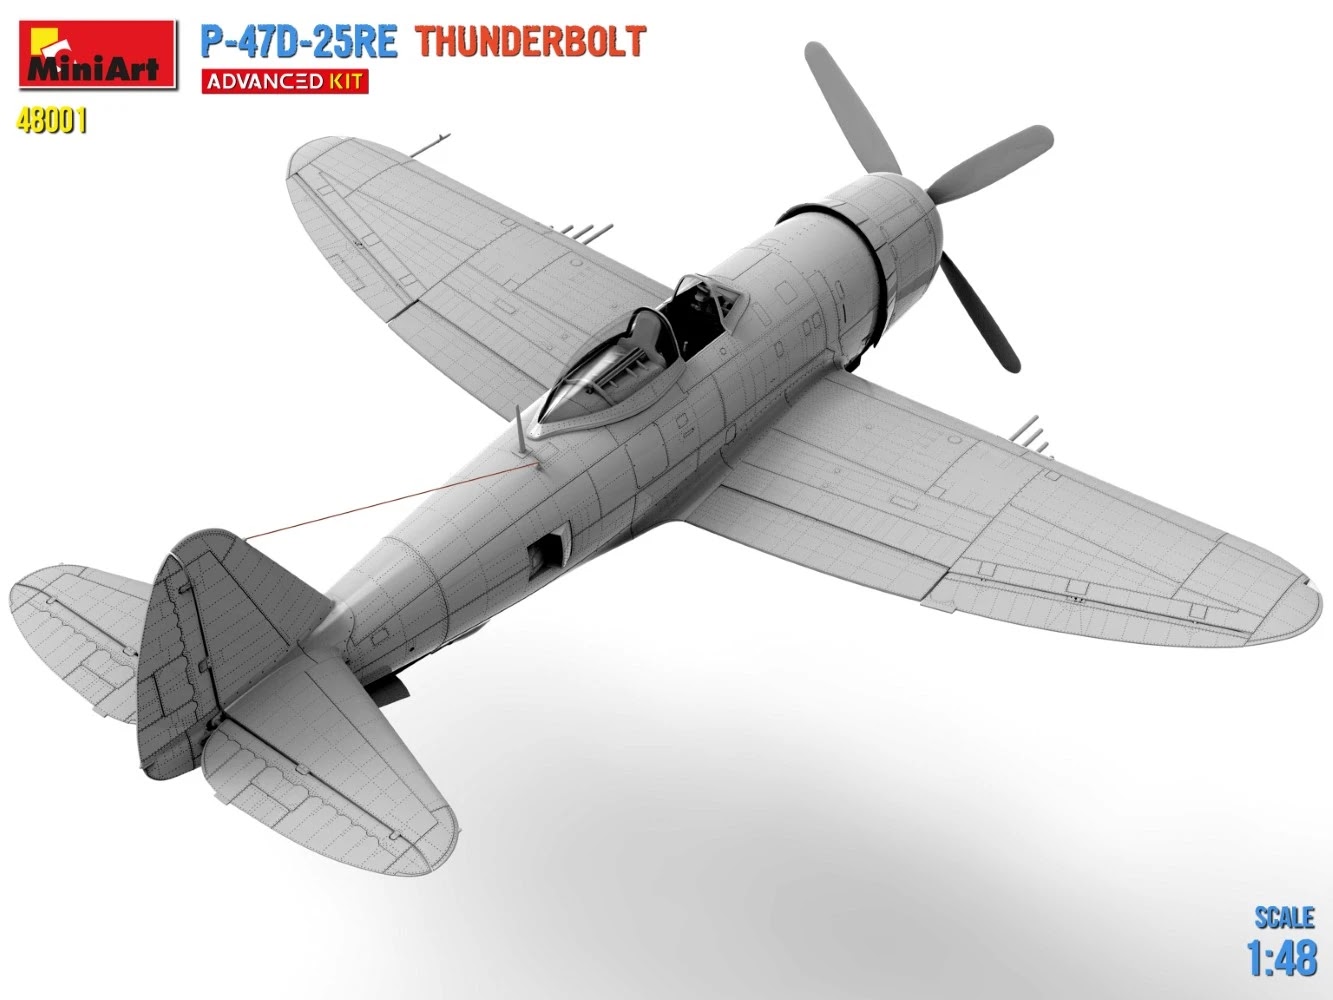 MiniArt ups the detail on their P-47D CAD-8